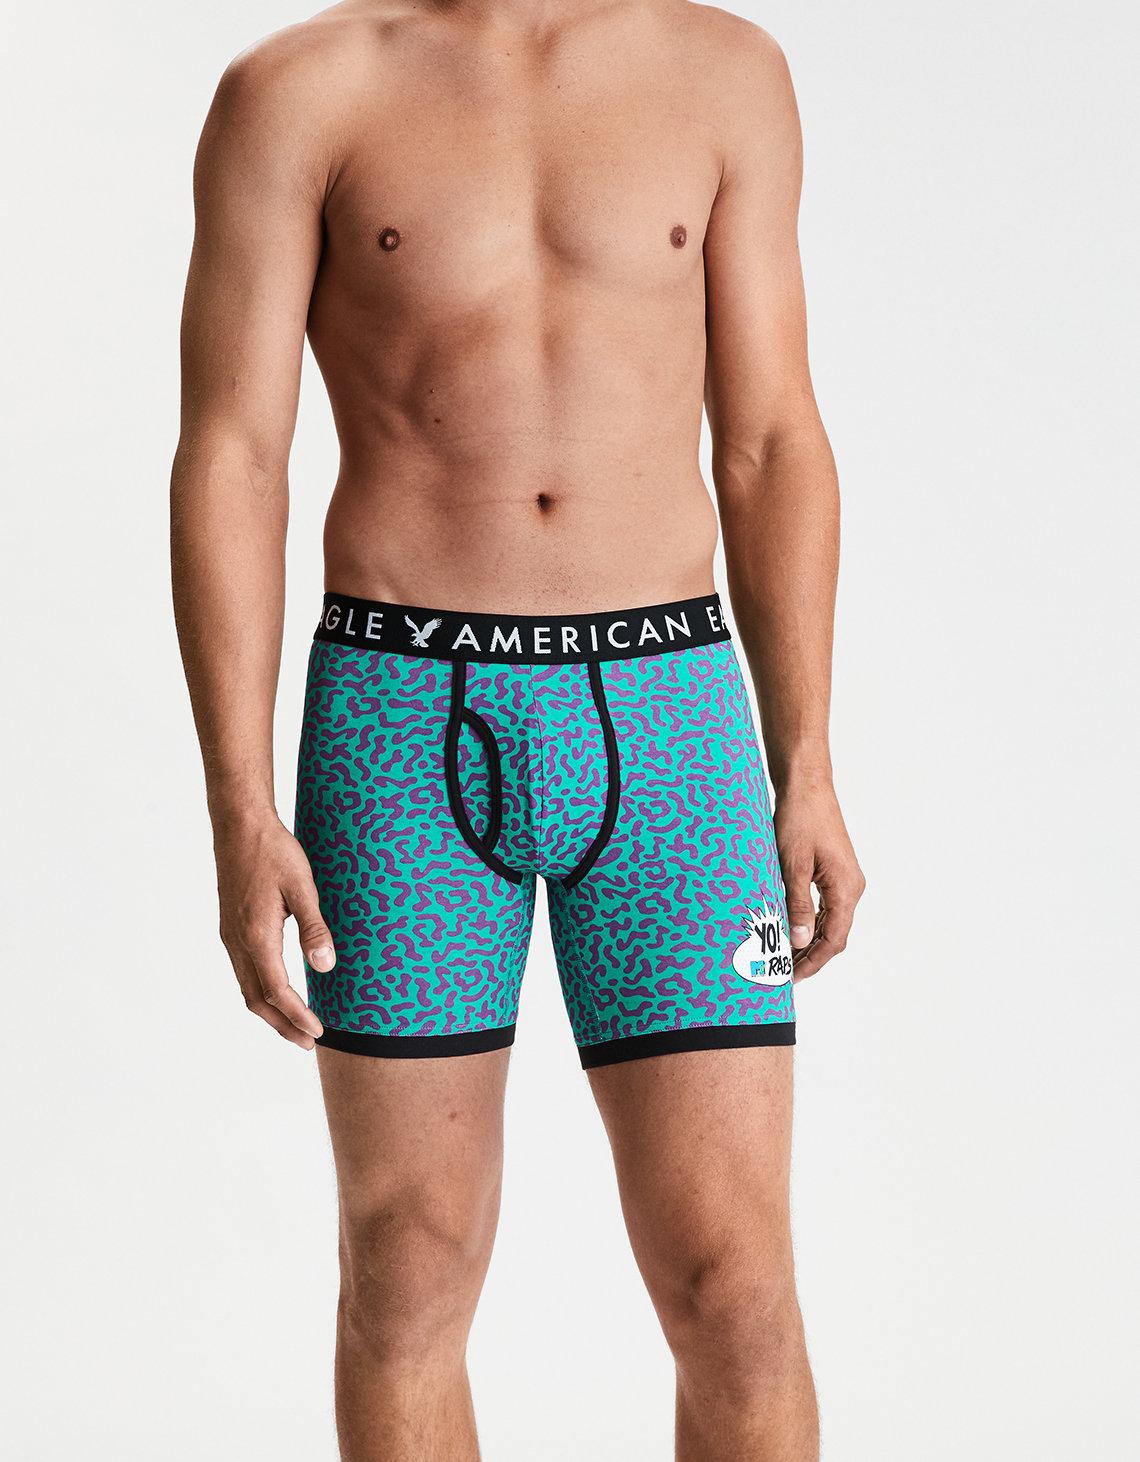 Lyst - American Eagle X Mtv 6 Classic Boxer Brief in Pink 